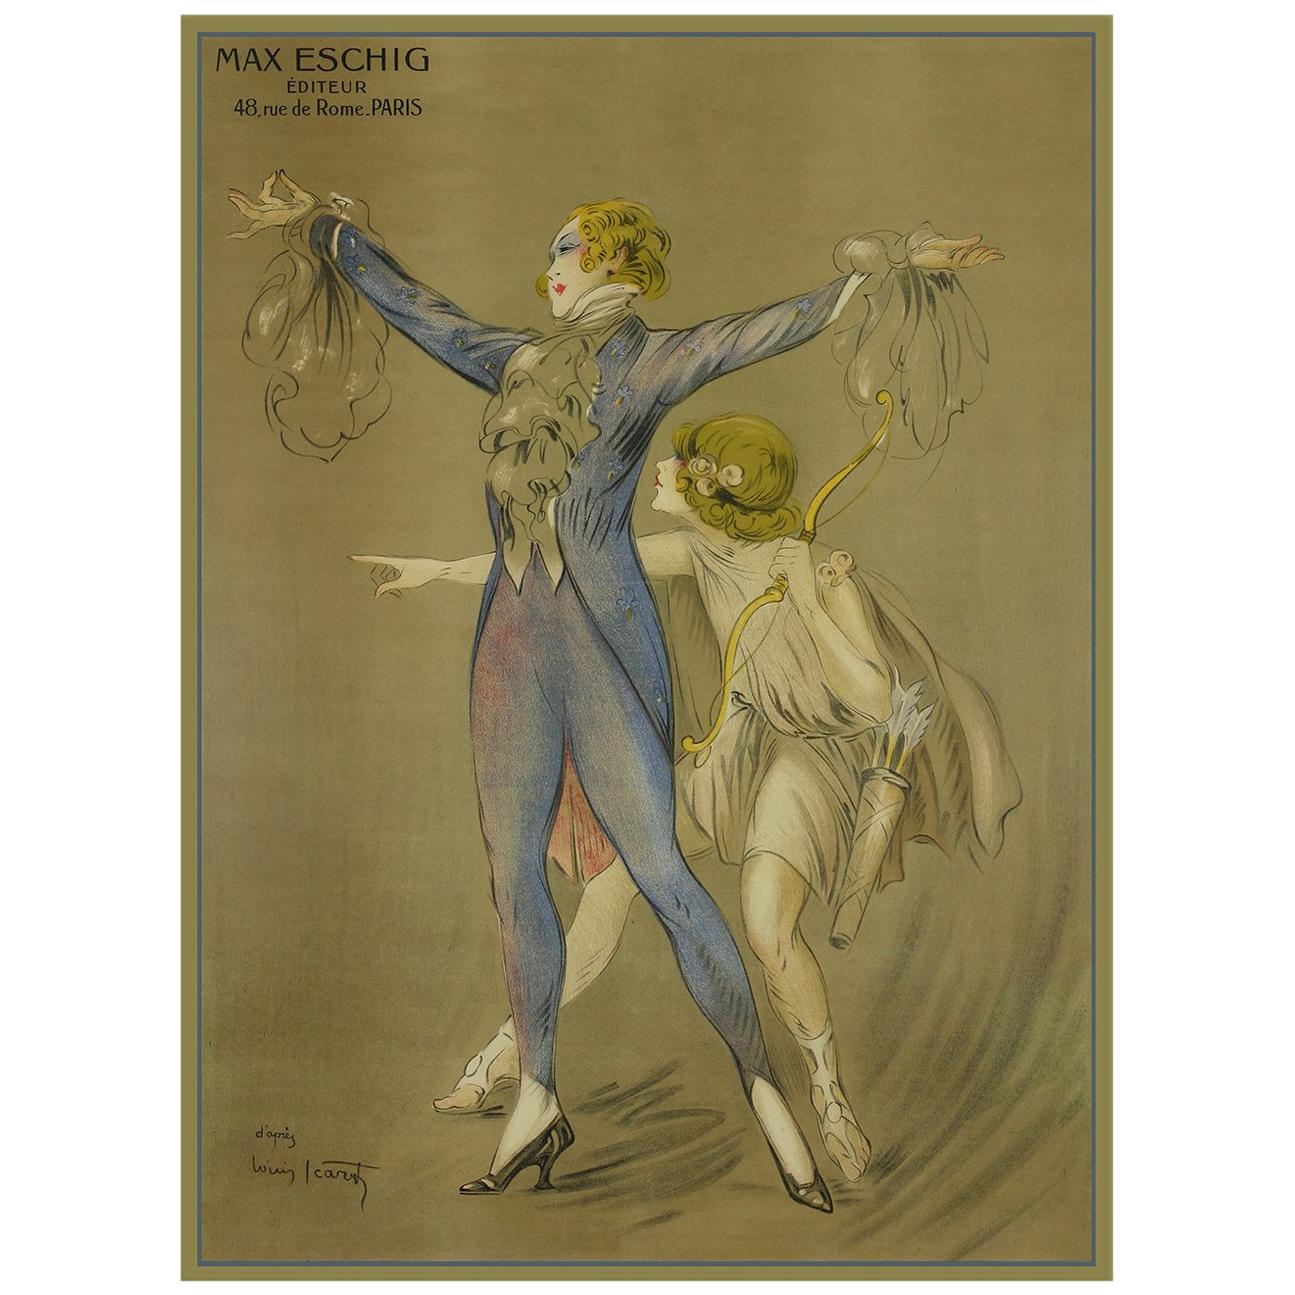 Advert for Max Eschig, after Belle Époque Vintage Poster by Louis Icart For Sale